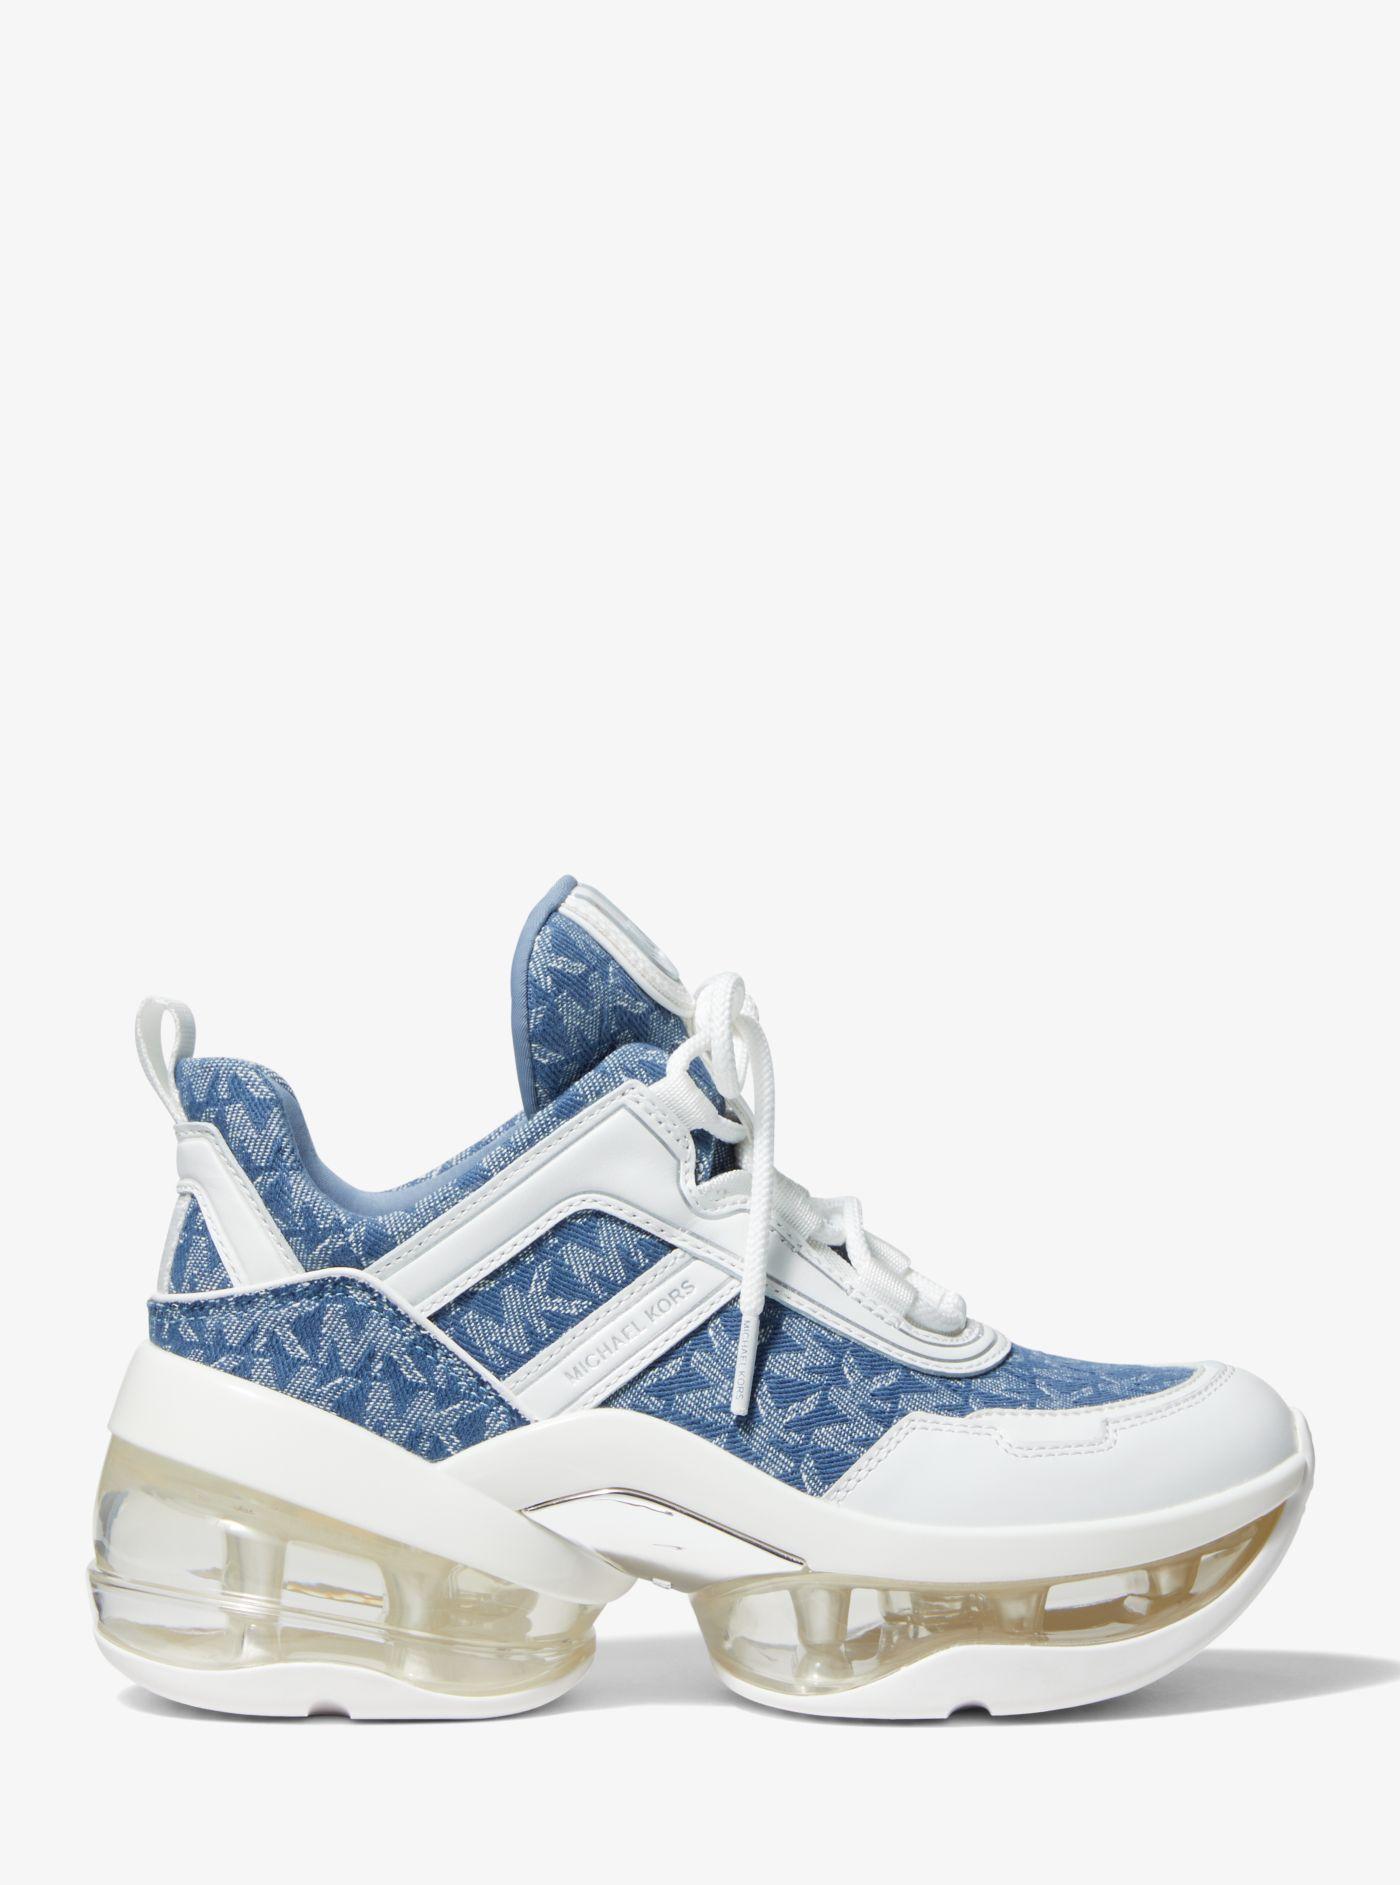 Michael Kors Olympia Extreme Denim Logo Jacquard And Leather Trainer in  Blue | Lyst